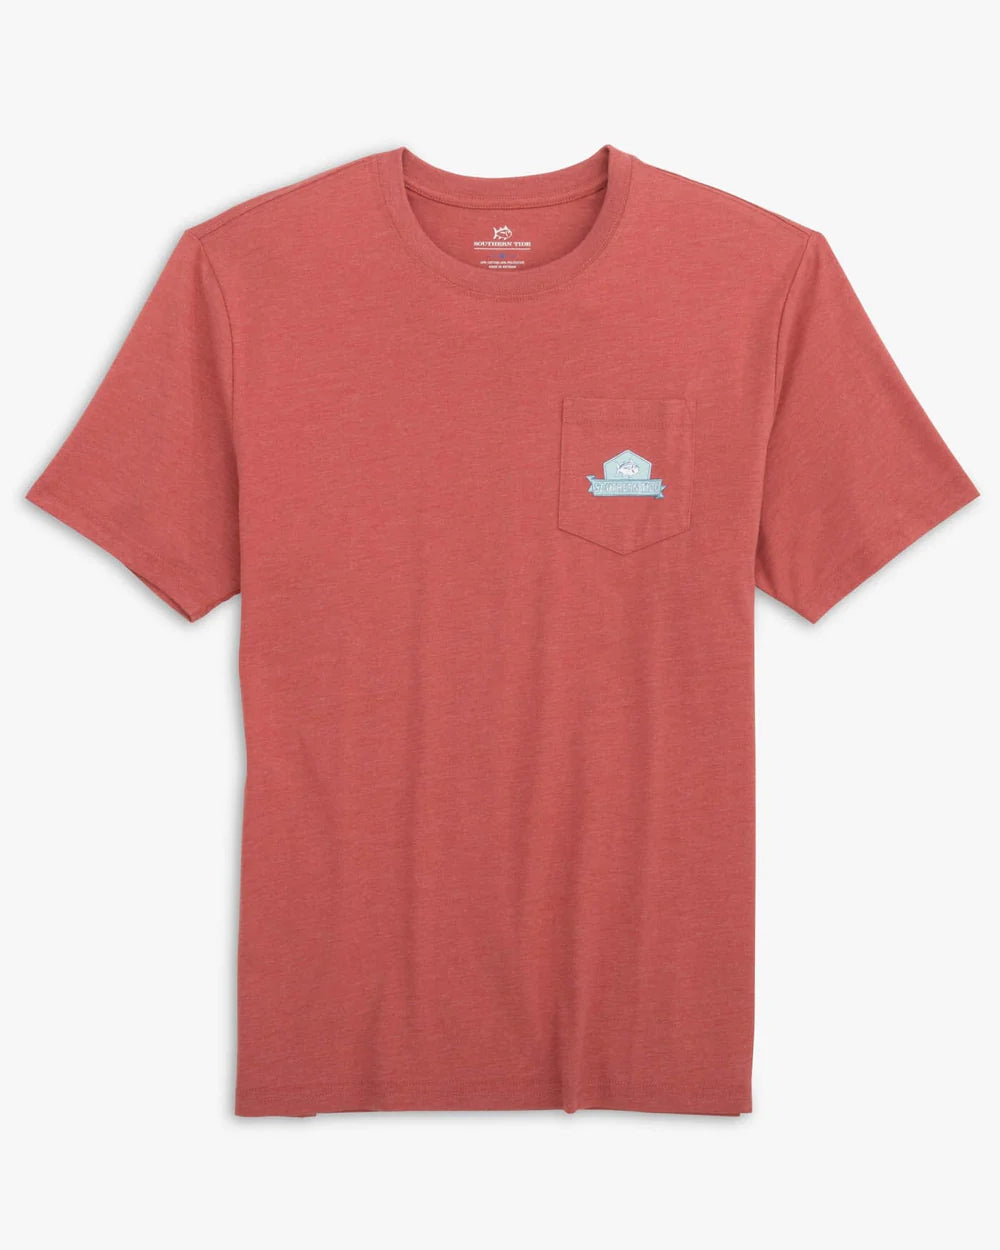 SOUTHERN TIDE Men's Tees Southern Tide Heather Southern Tide Cruise T-Shirt || David's Clothing